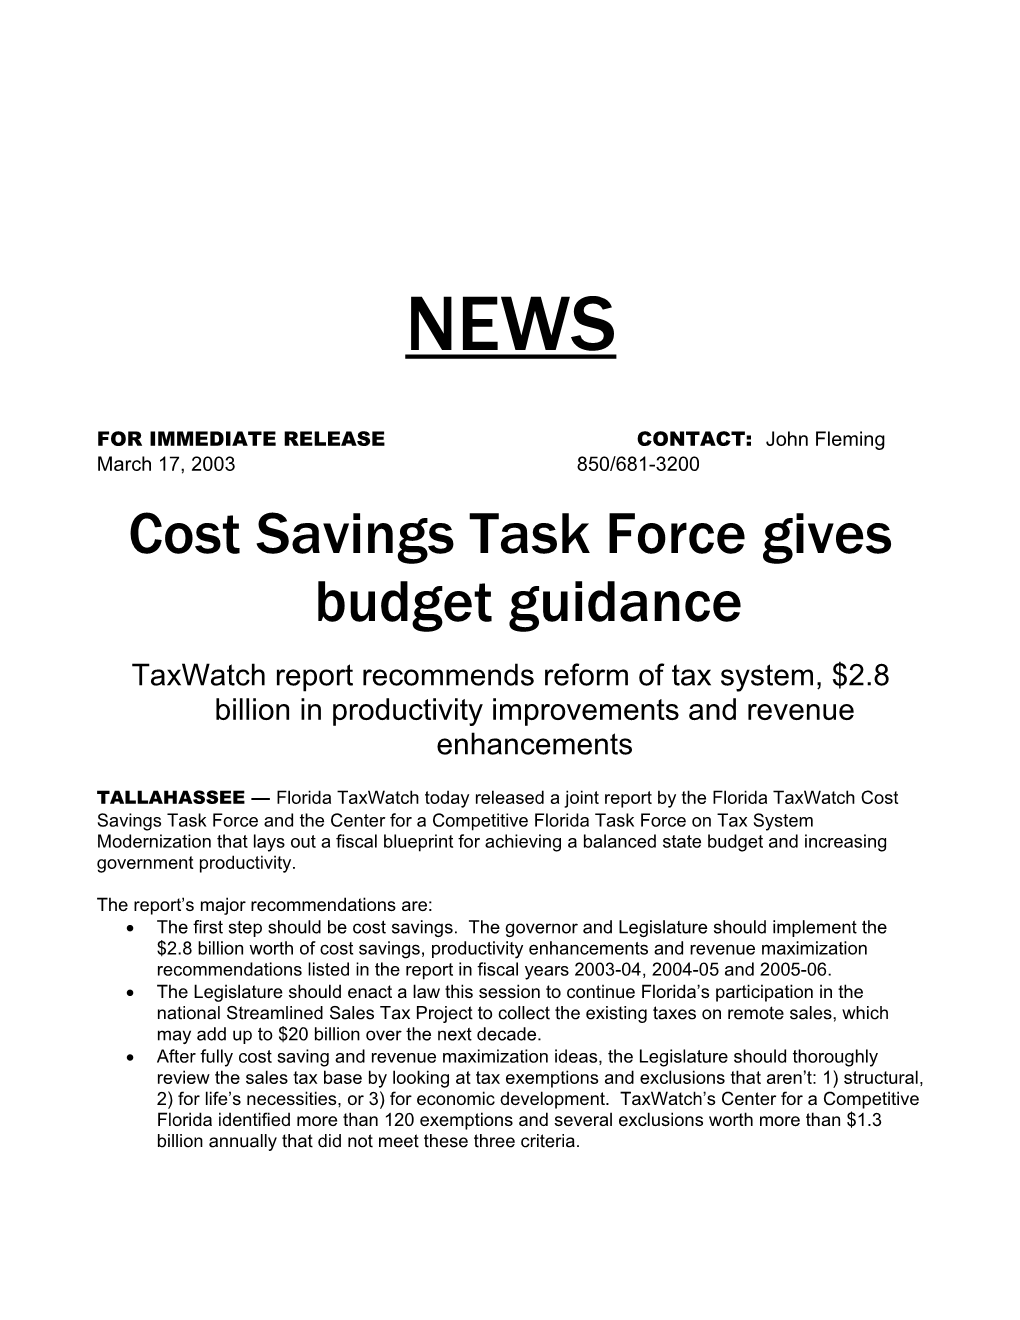 Cost Savings Task Force Gives Budget Guidance